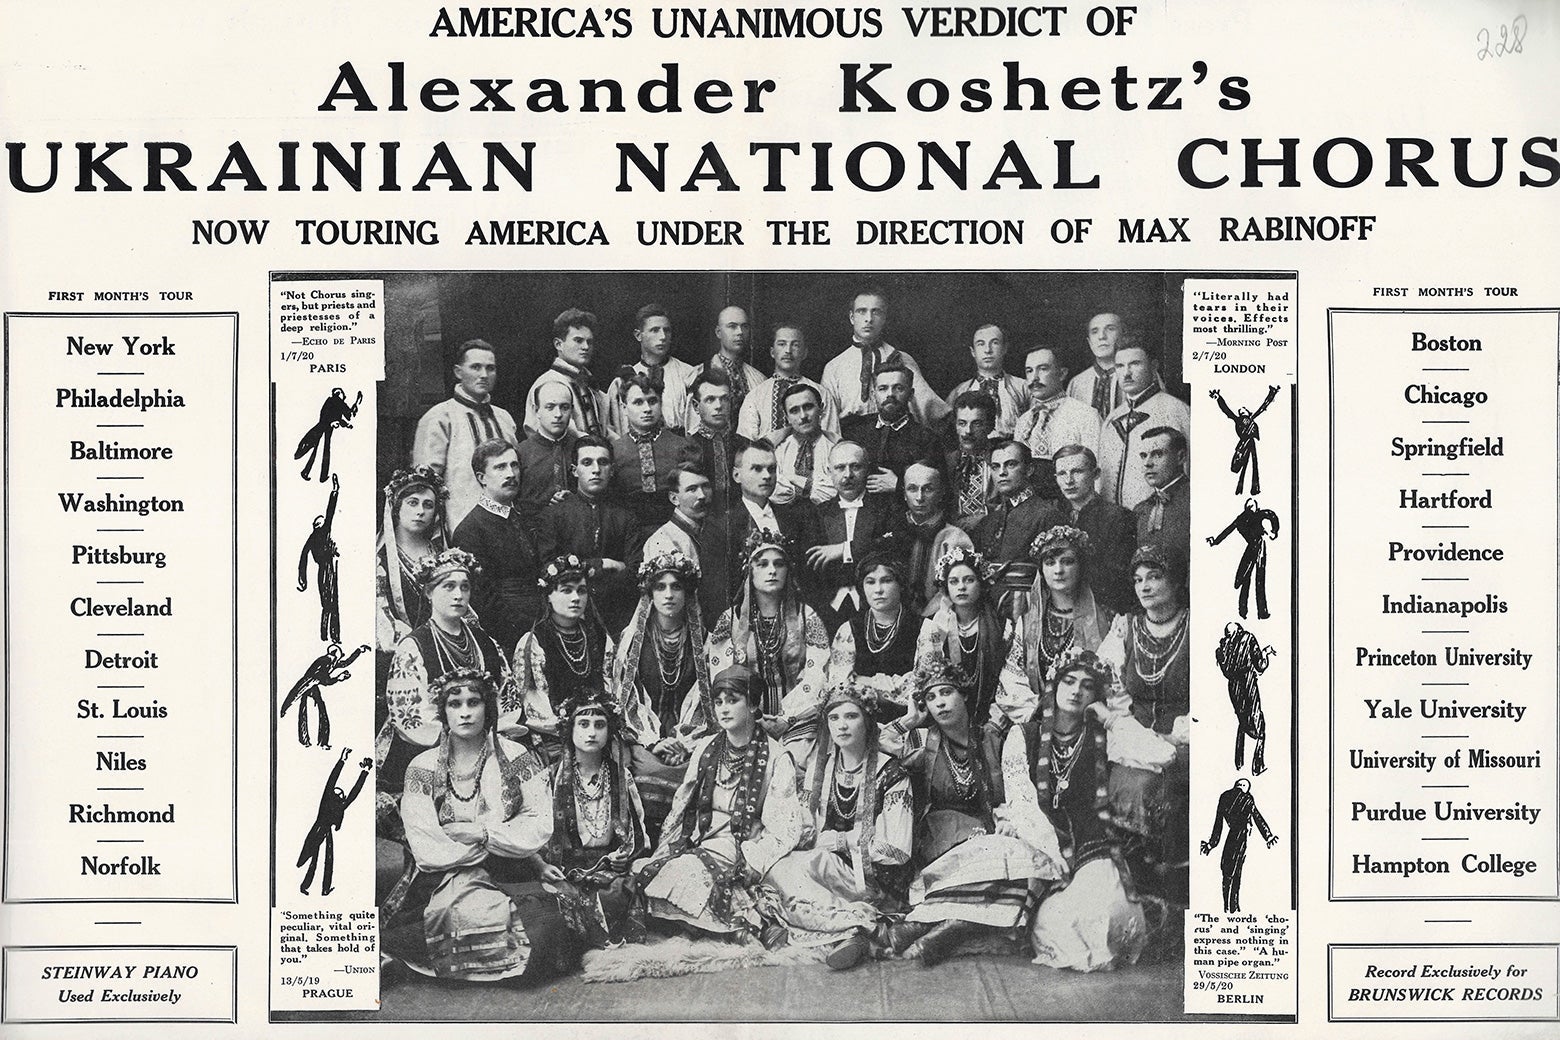 Archival photo of a newspaper clipping: "America's Unanimous Verdict of Alexander Koshetz's Ukrainian National Chorus: Now Touring America Under the Direction of Max Rabinoff"